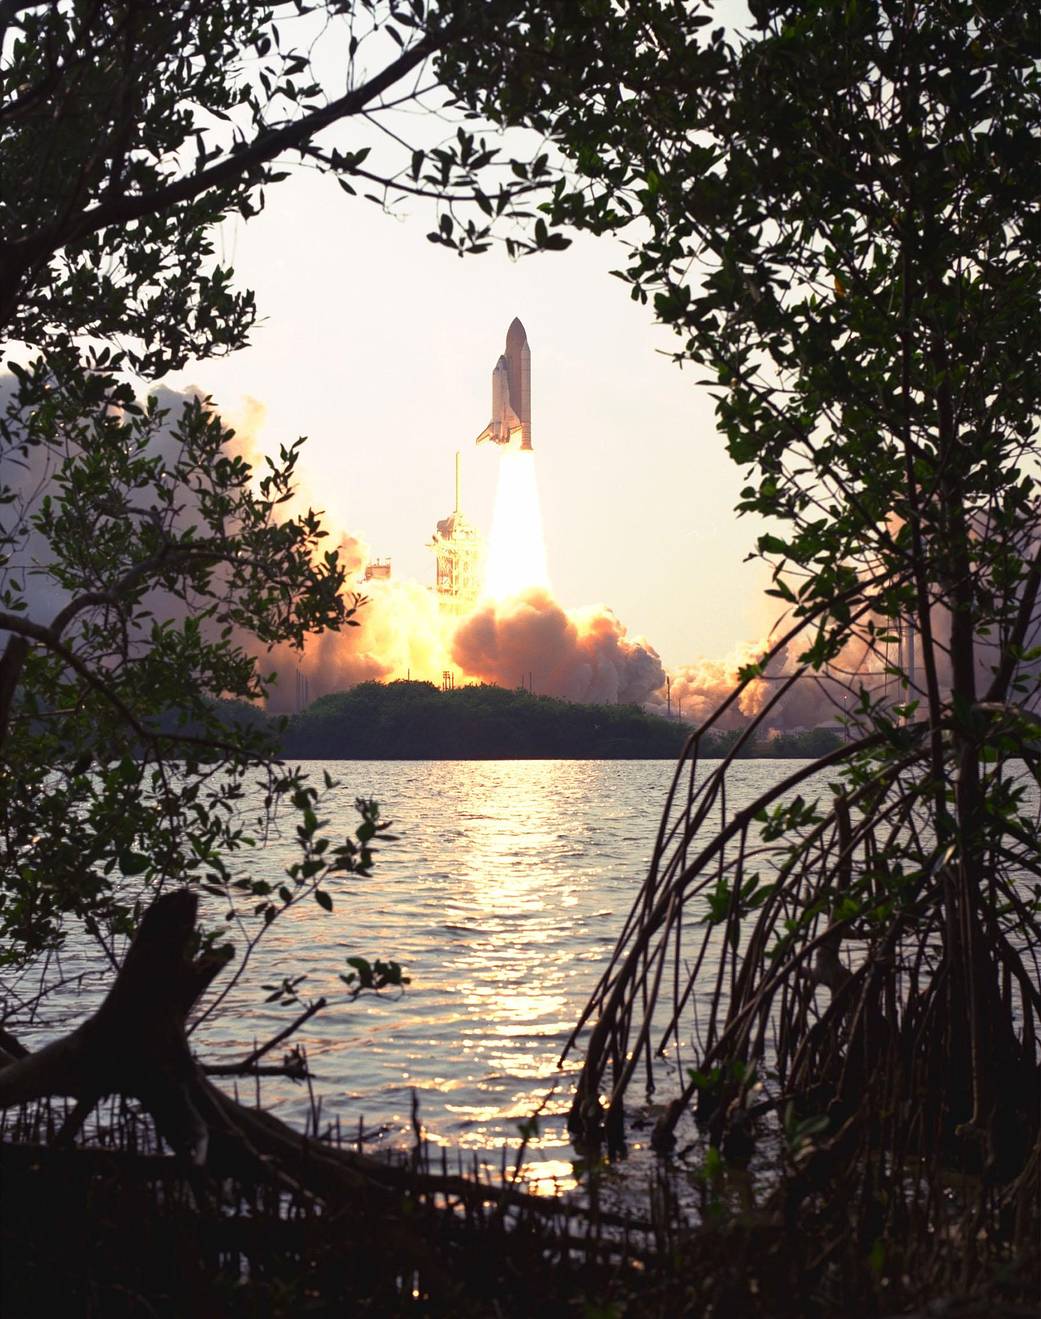 This week in 1998, space shuttle Discovery, mission STS-91, launched from NASA’s Kennedy Space Center.